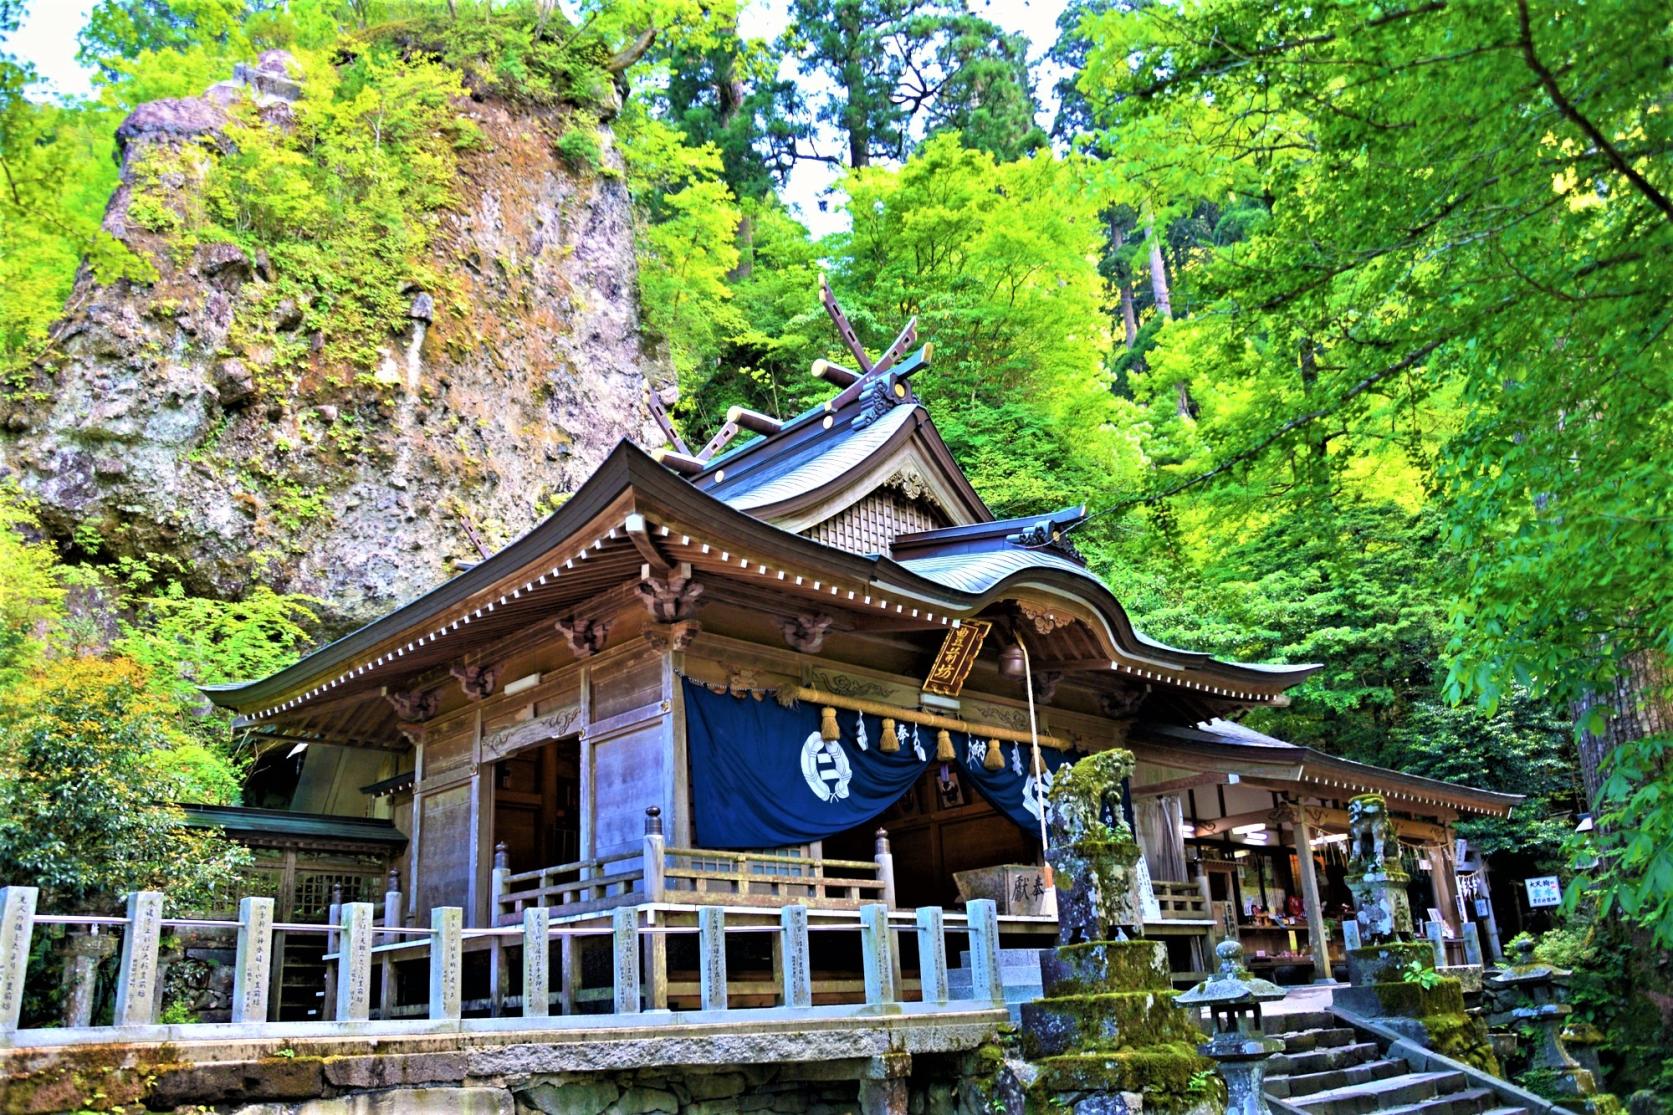 Marvel at the Buzenbo Takasumi Shrine and Its Pavilion Built into a Giant Rock Face!-0